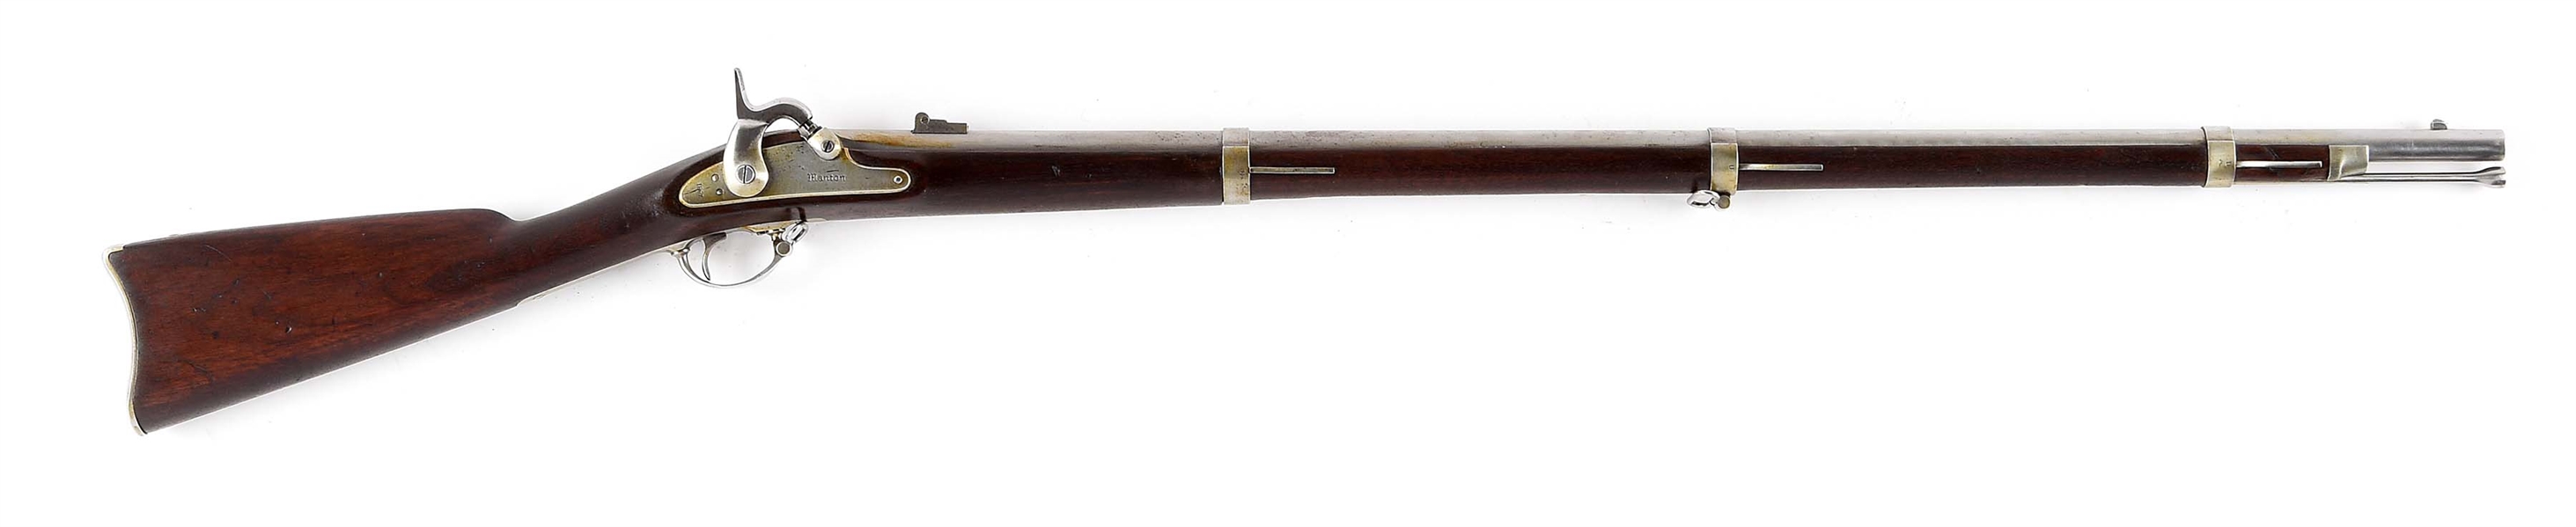 (A) RARE U.S. MODEL 1861 WHITNEY "MANTON" MARKED PERCUSSION RIFLE-MUSKET.